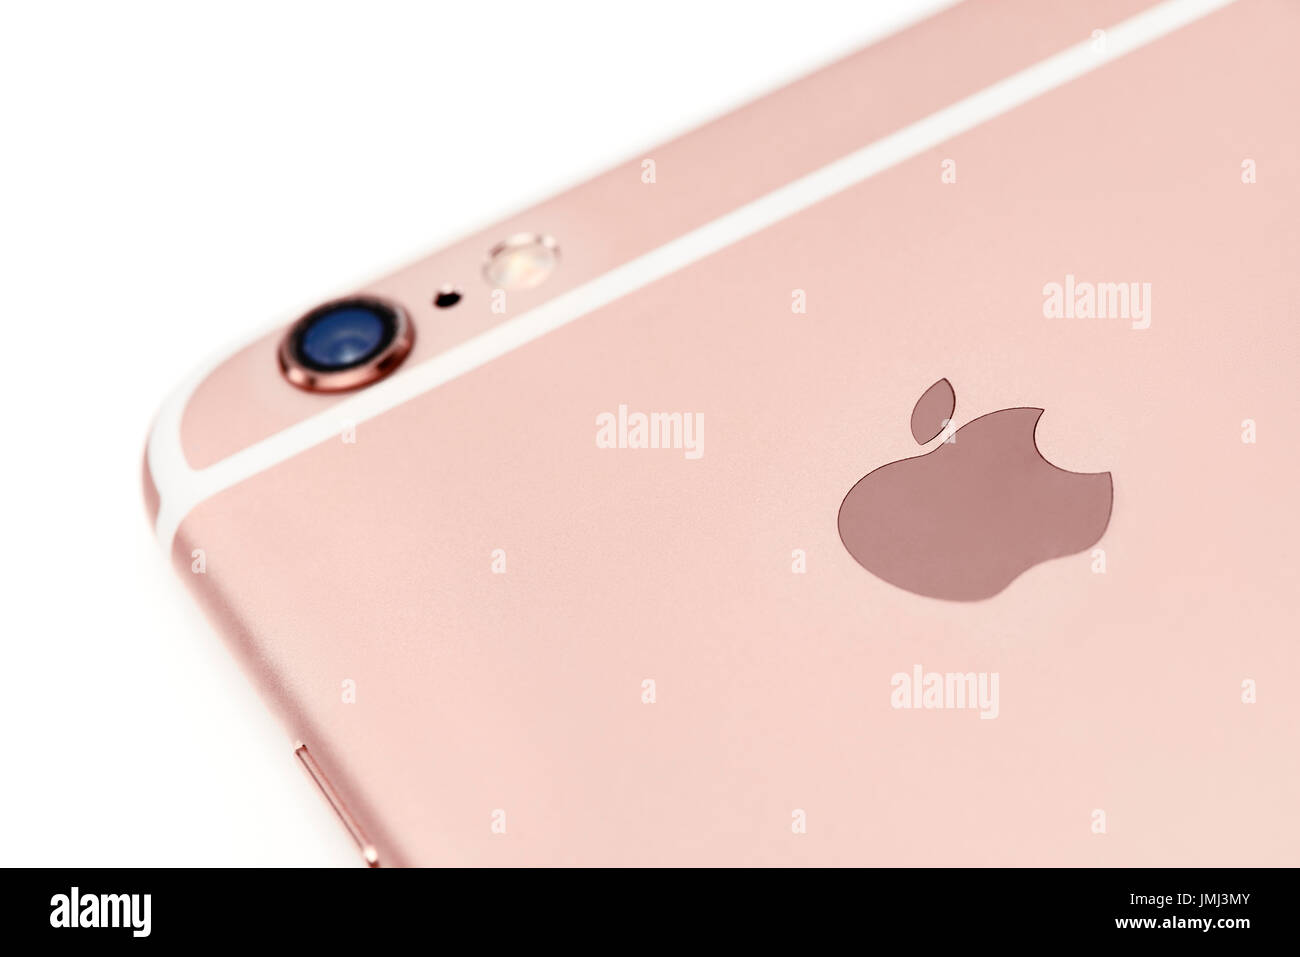 Closeup of Apple logo on rose gold iPhone 6s smartphone device isolated on white background Stock Photo